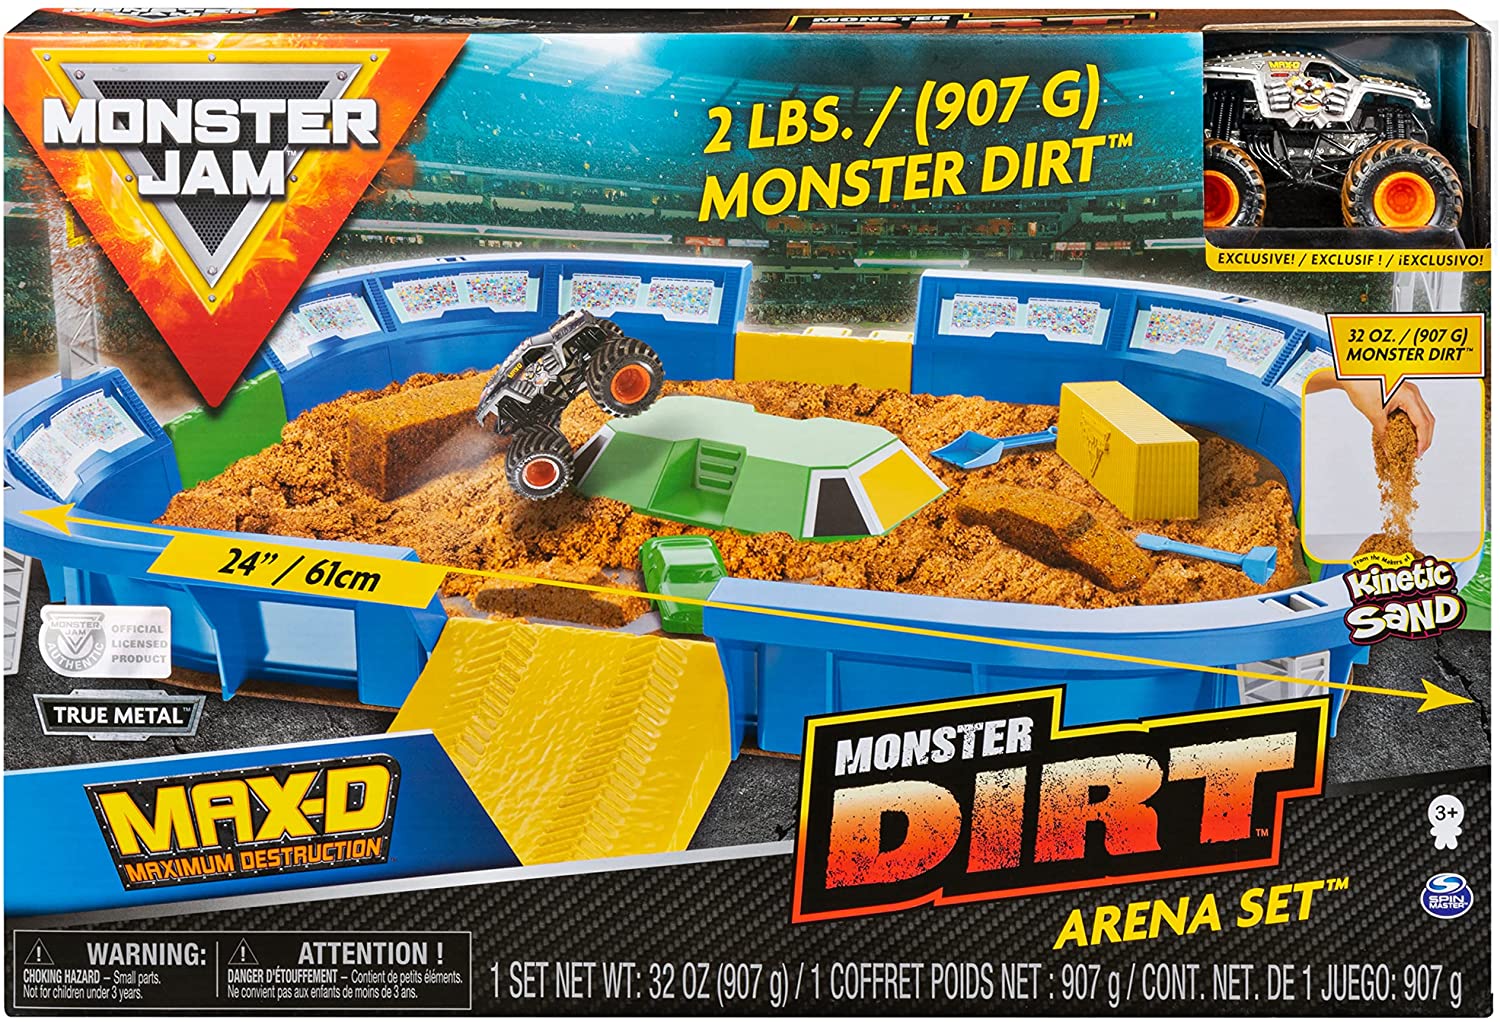 Monster Jam Monster Dirt Arena 24" Playset w/ 2lbs of Monster Dirt & 1:64 Scale Die-Cast Monster Jam Truck $9.50 + Free Shipping w/ Amazon Prime or Orders $25+